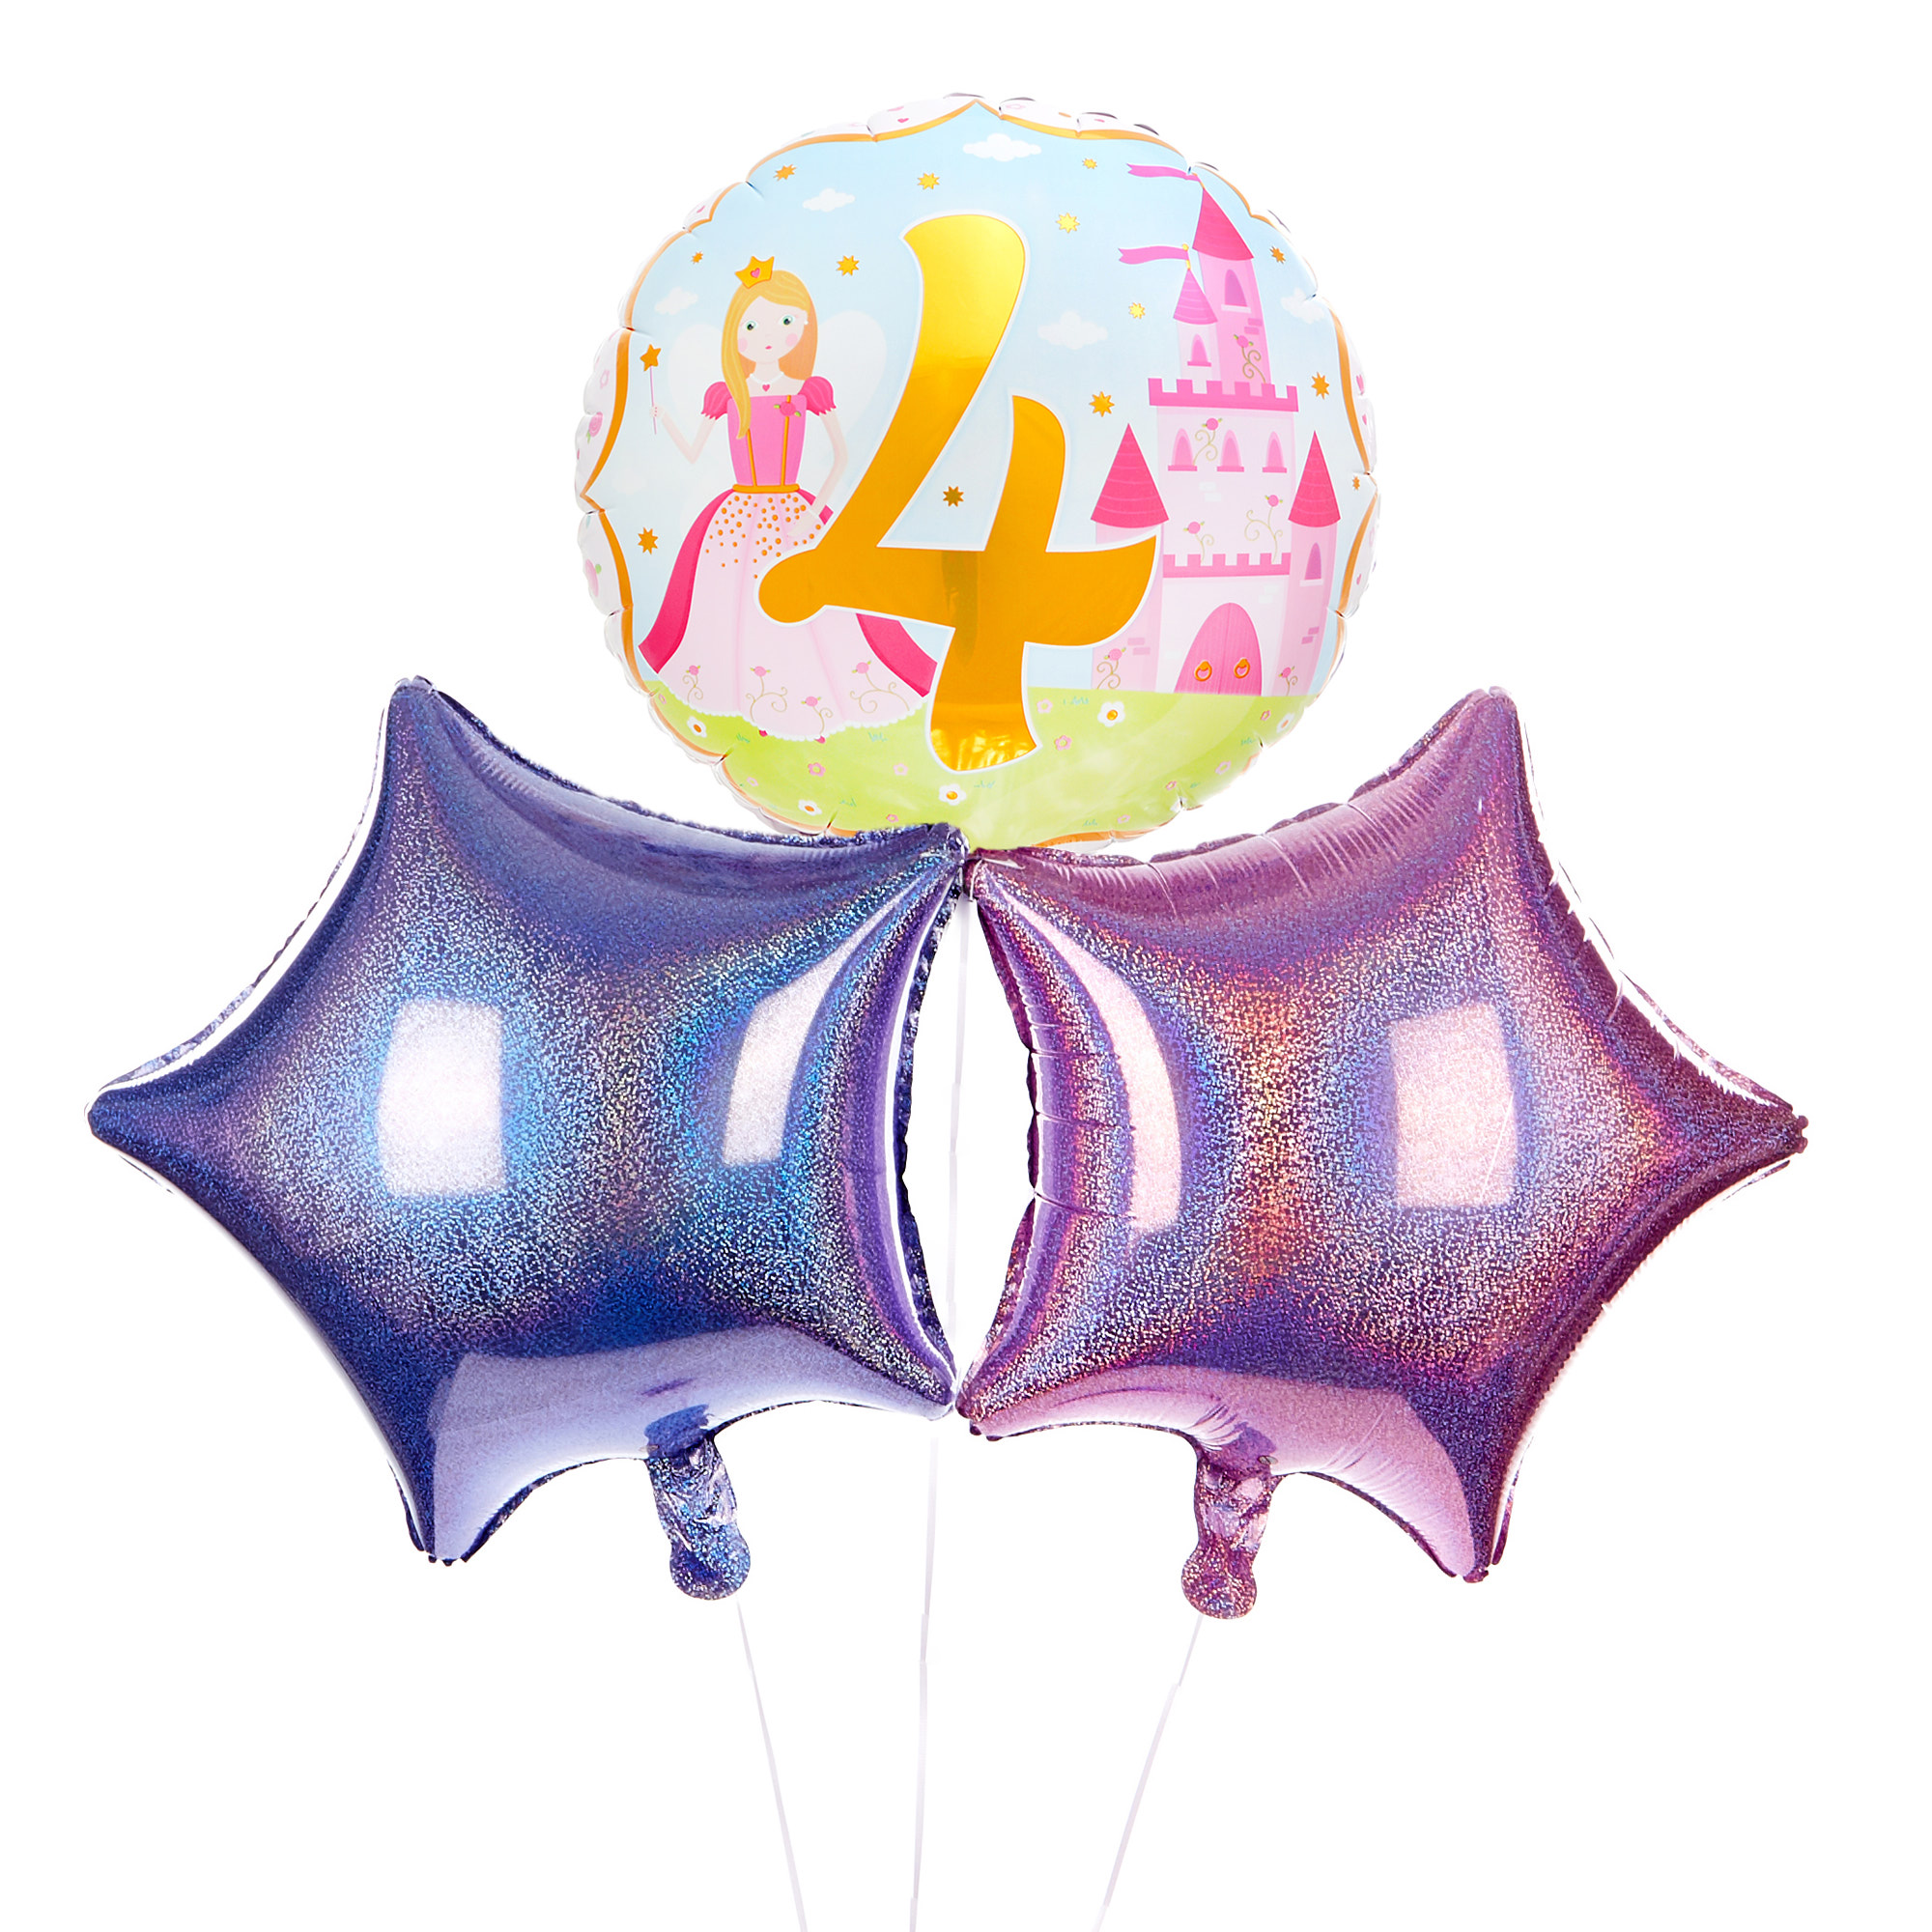 Princess 4th Birthday Balloon Bouquet - DELIVERED INFLATED!